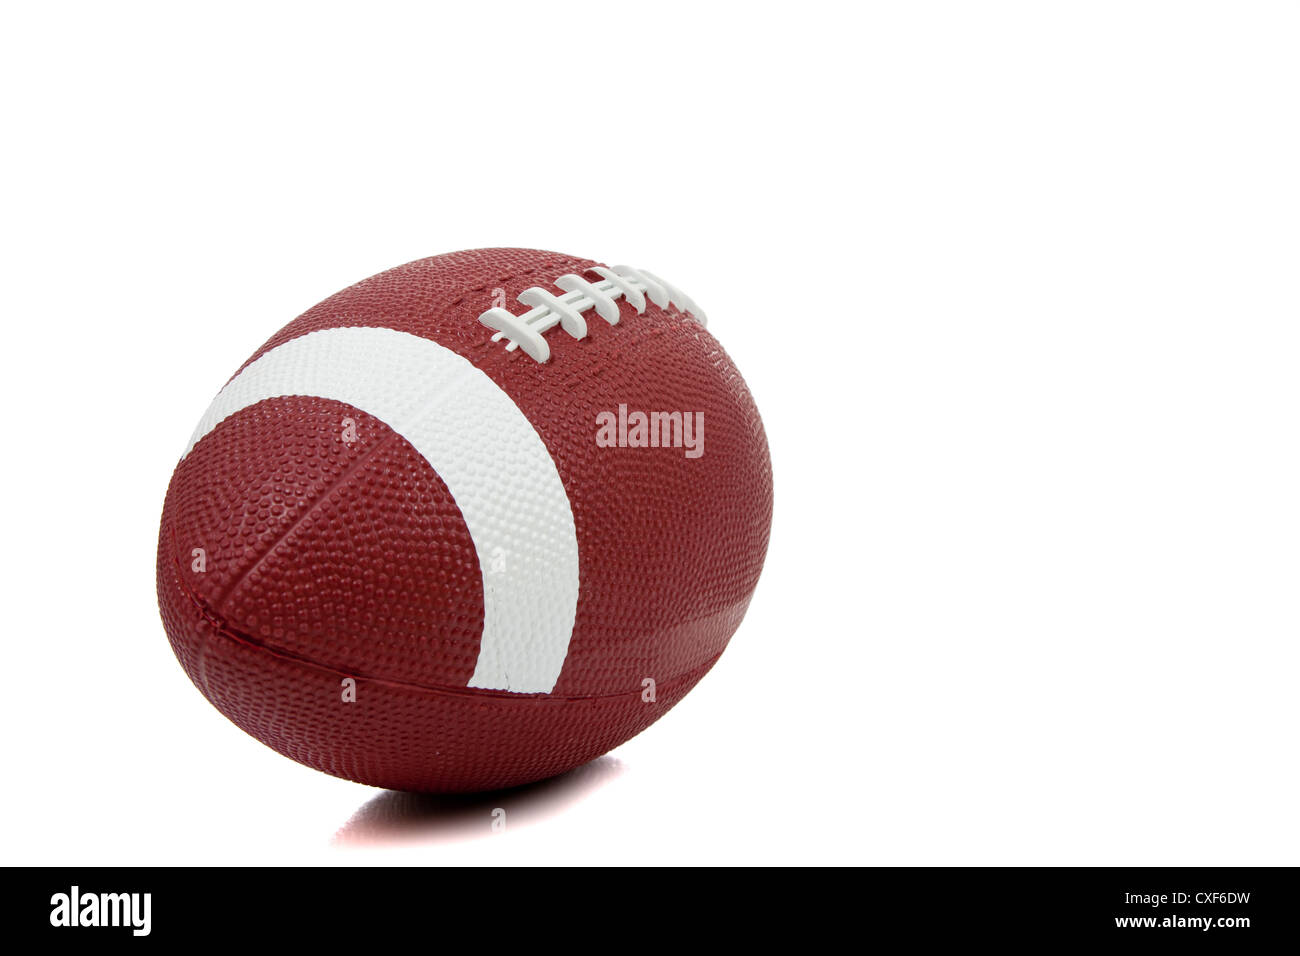 American football on a white background with copy space Stock Photo